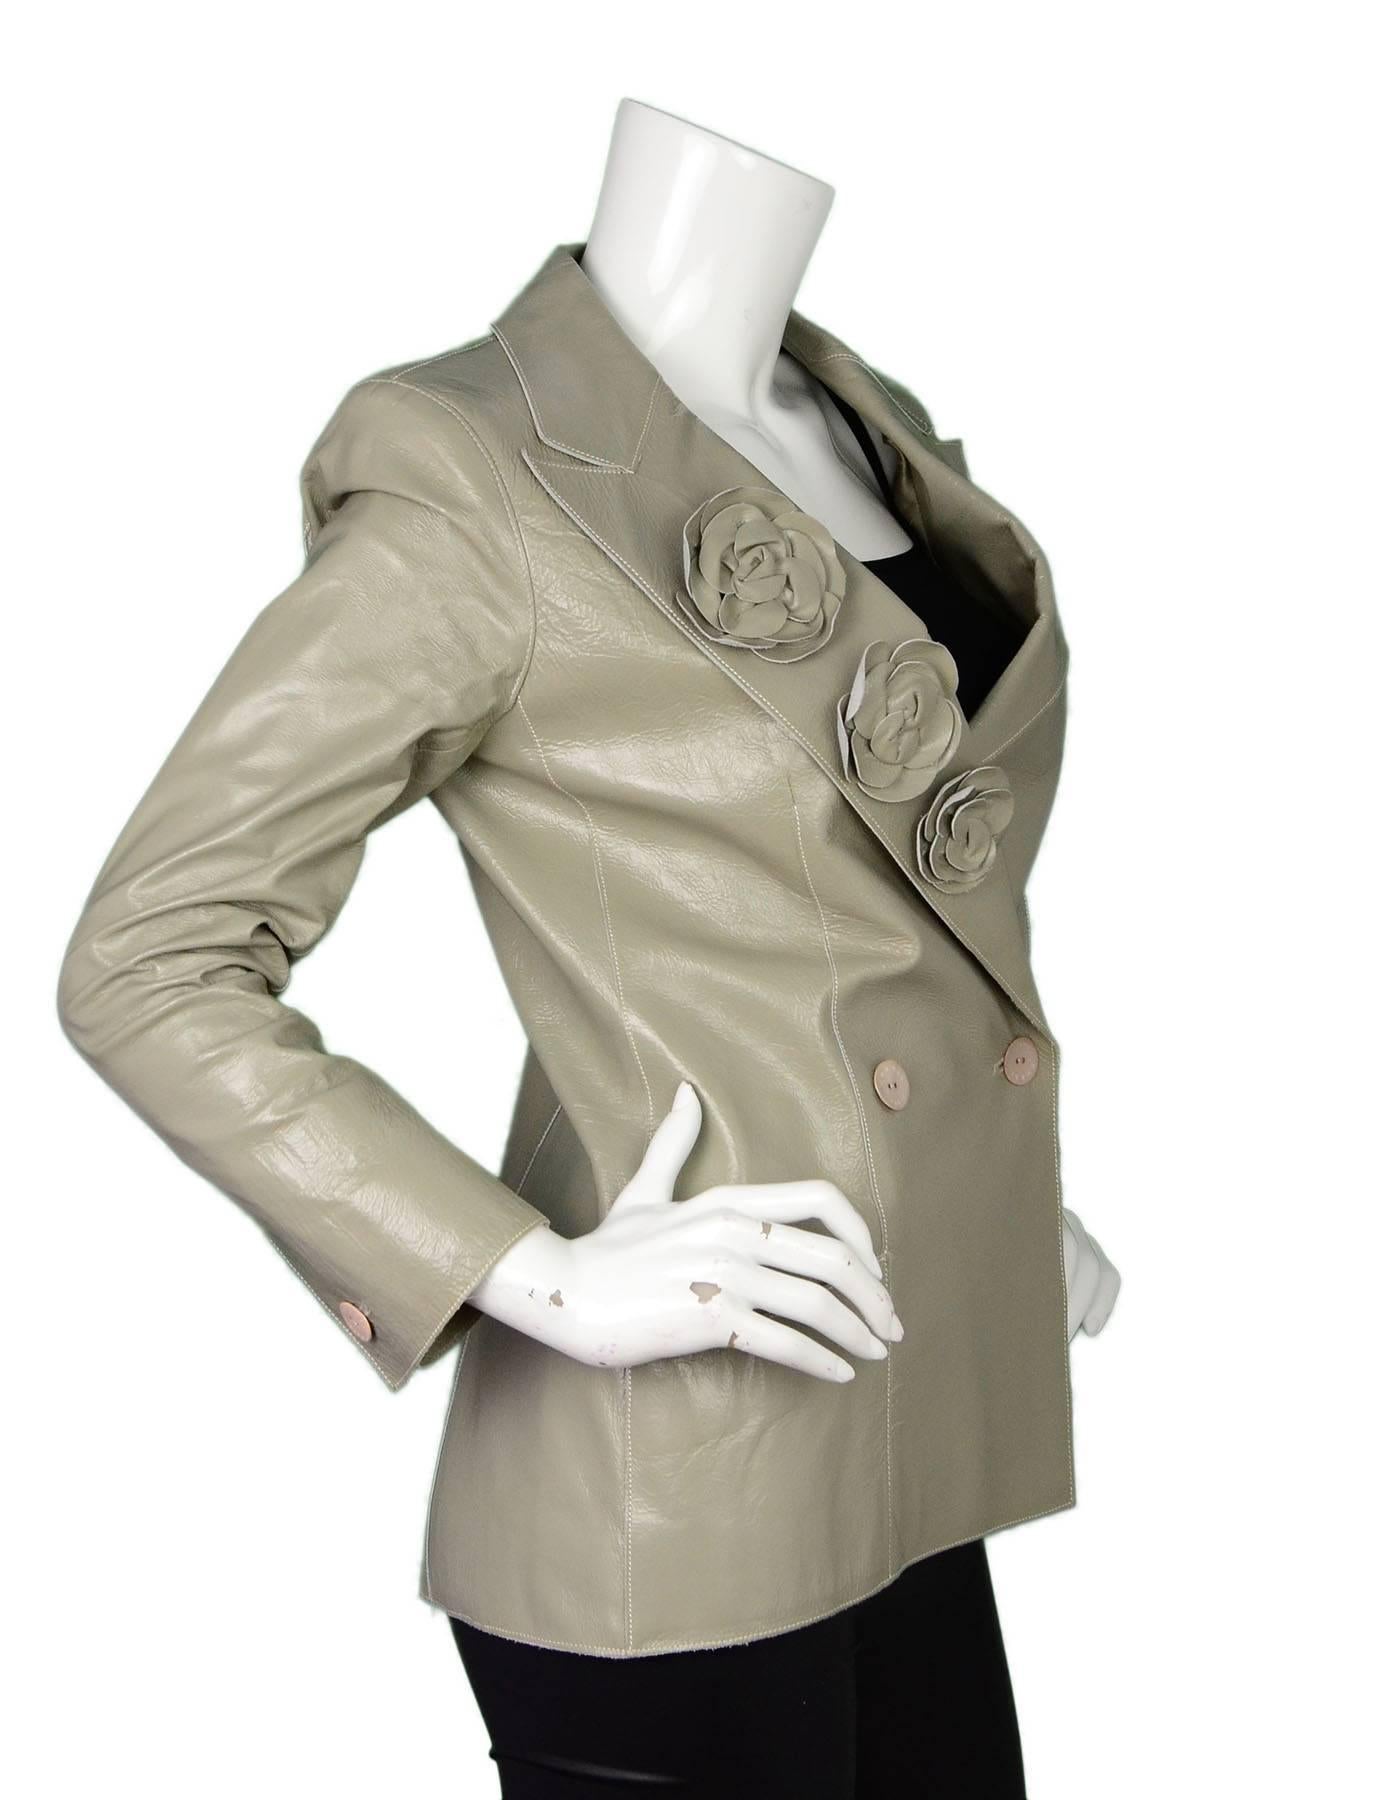 Chanel Moss Green Leather Jacket 
Features 3 camelia flowers

Made In: France
Year of Production: 2003
Color: Moss green
Compsition: 100% calfskin
Lining: Moss green, 100% silk
Closure/Opening: Double breasted button down closure
Exterior